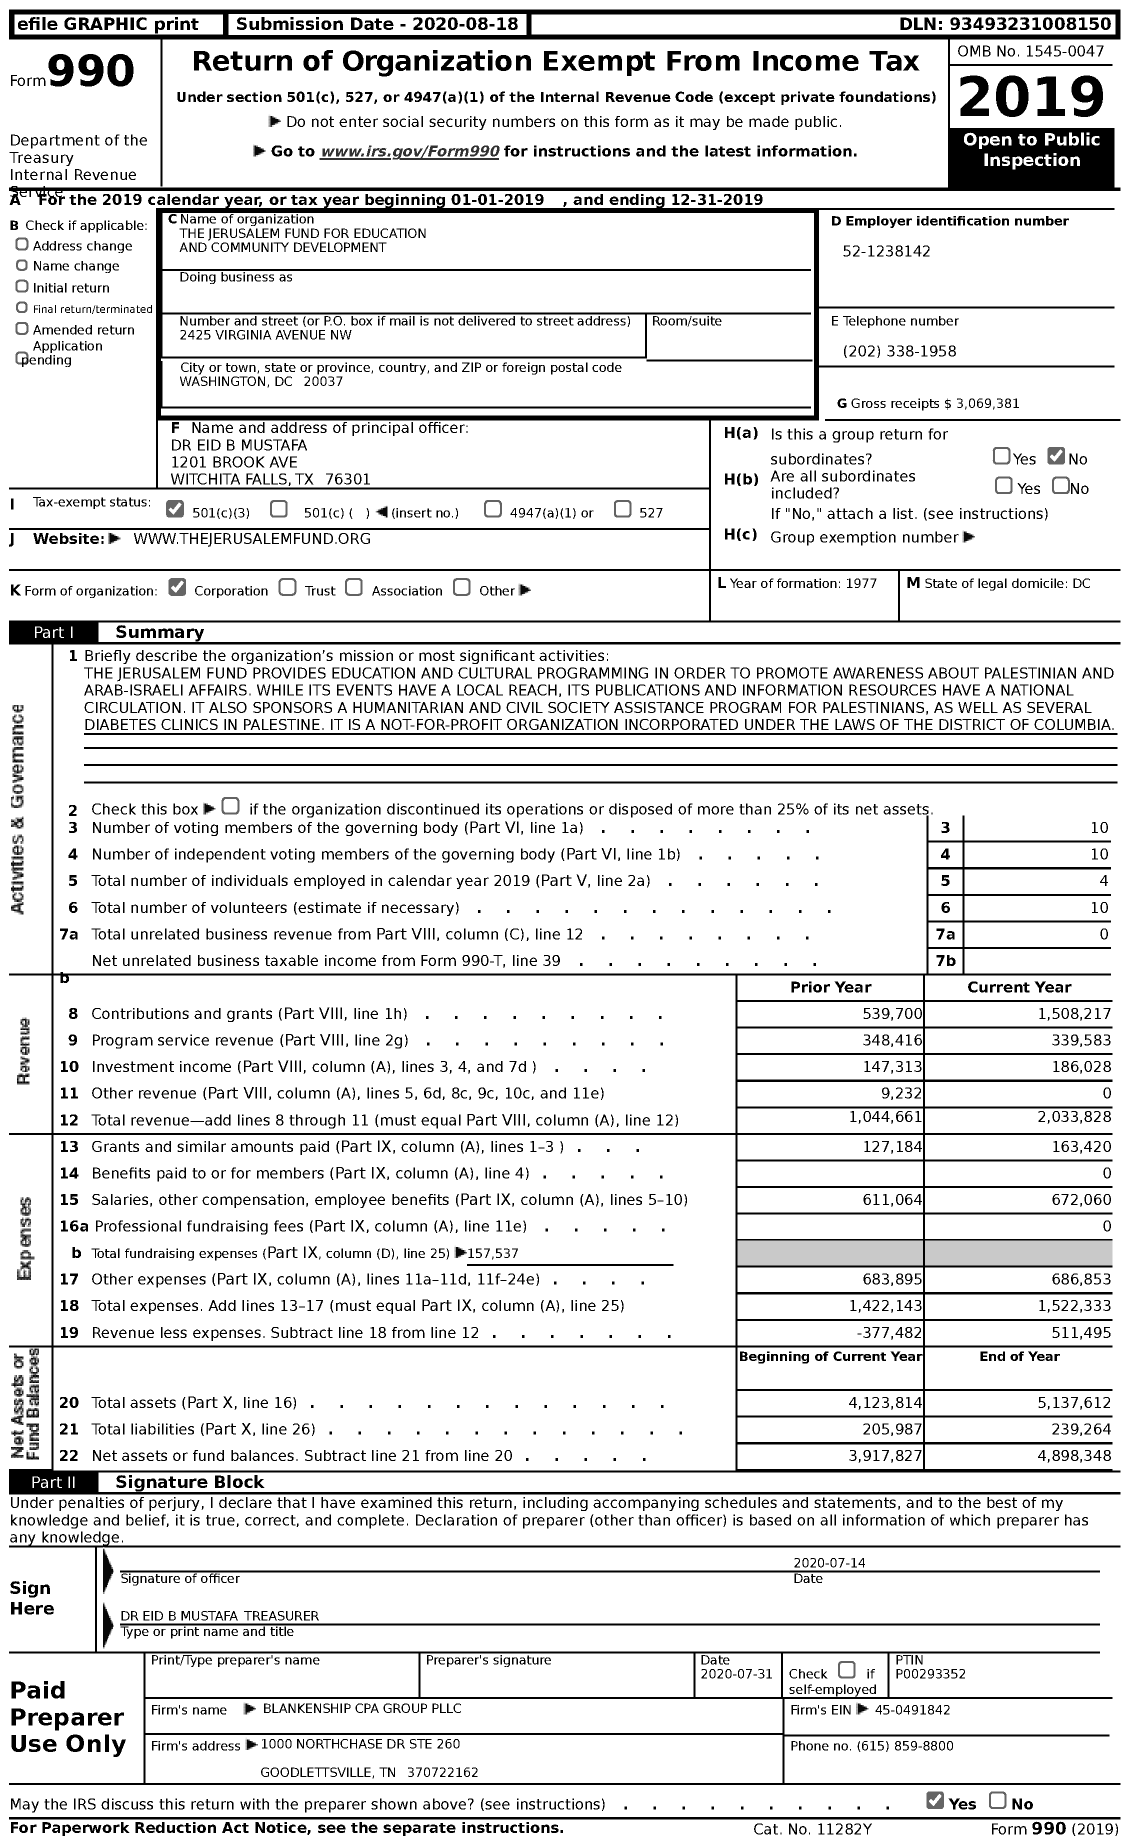 Image of first page of 2019 Form 990 for The Jerusalem Fund for Education and Community Development